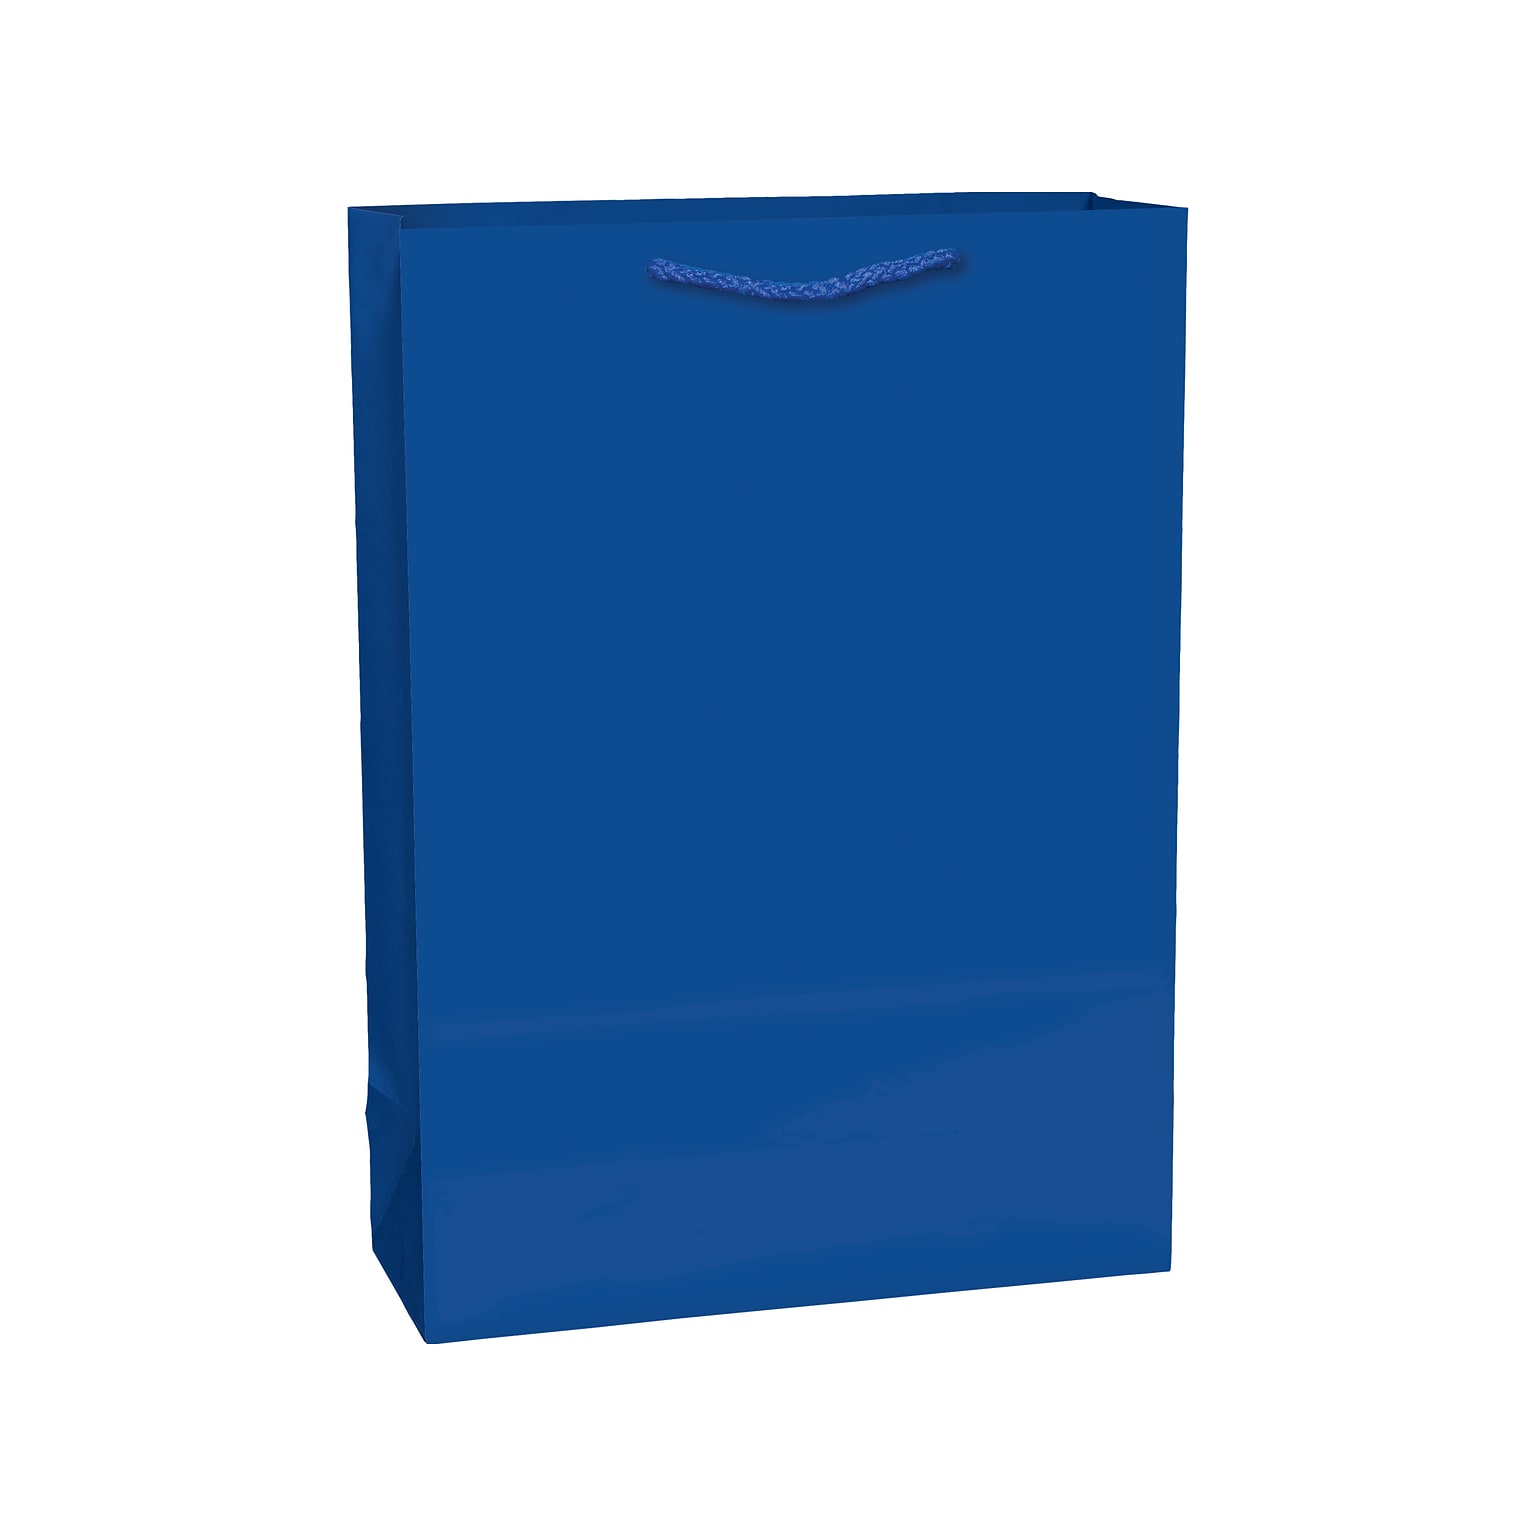 Amscan Solid Gift Bag, Bright Royal Blue, 6 Bags/Pack (47098.105)